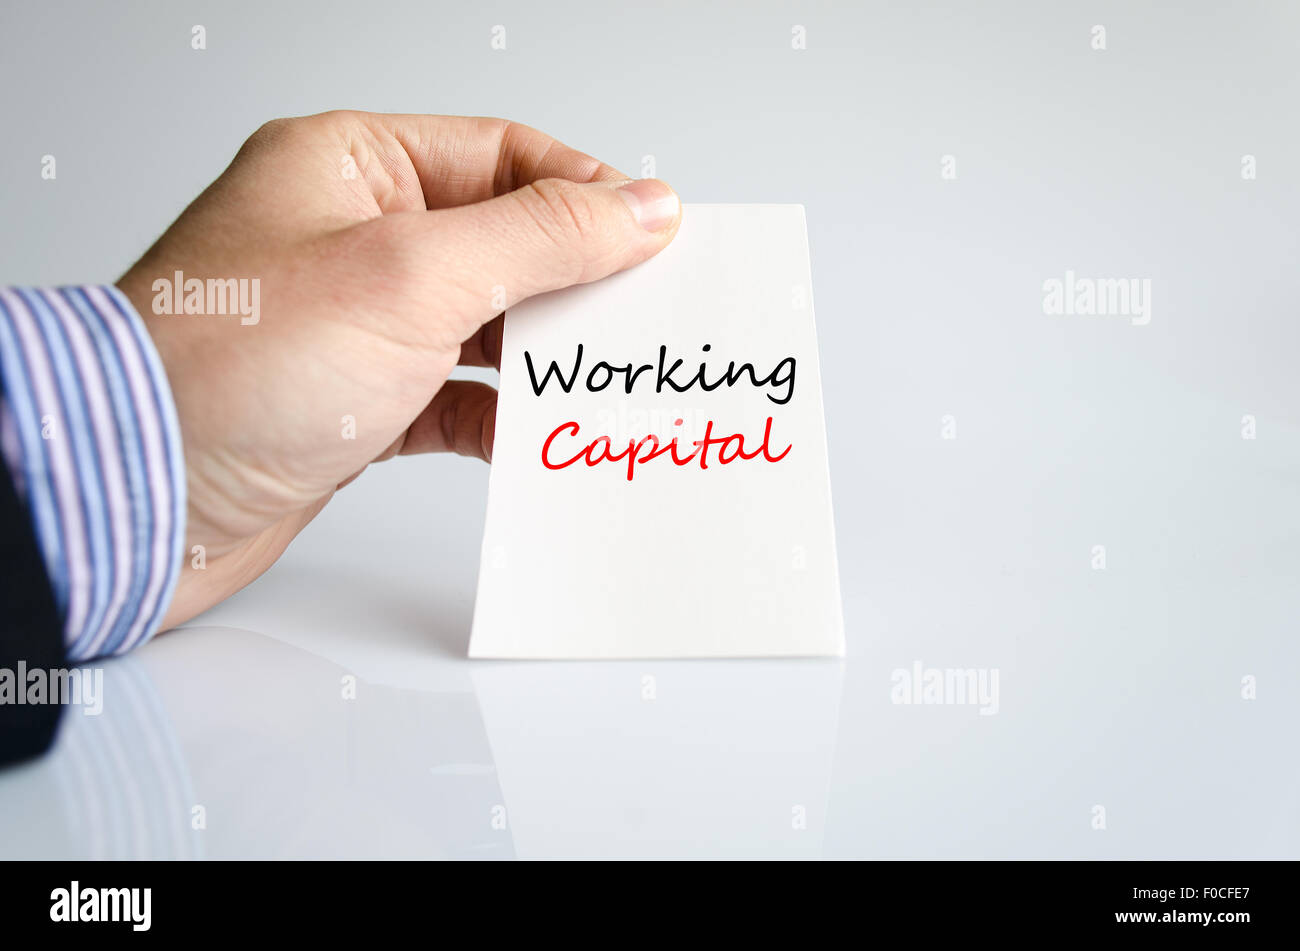 Working capital text concept isolated over white background Stock Photo